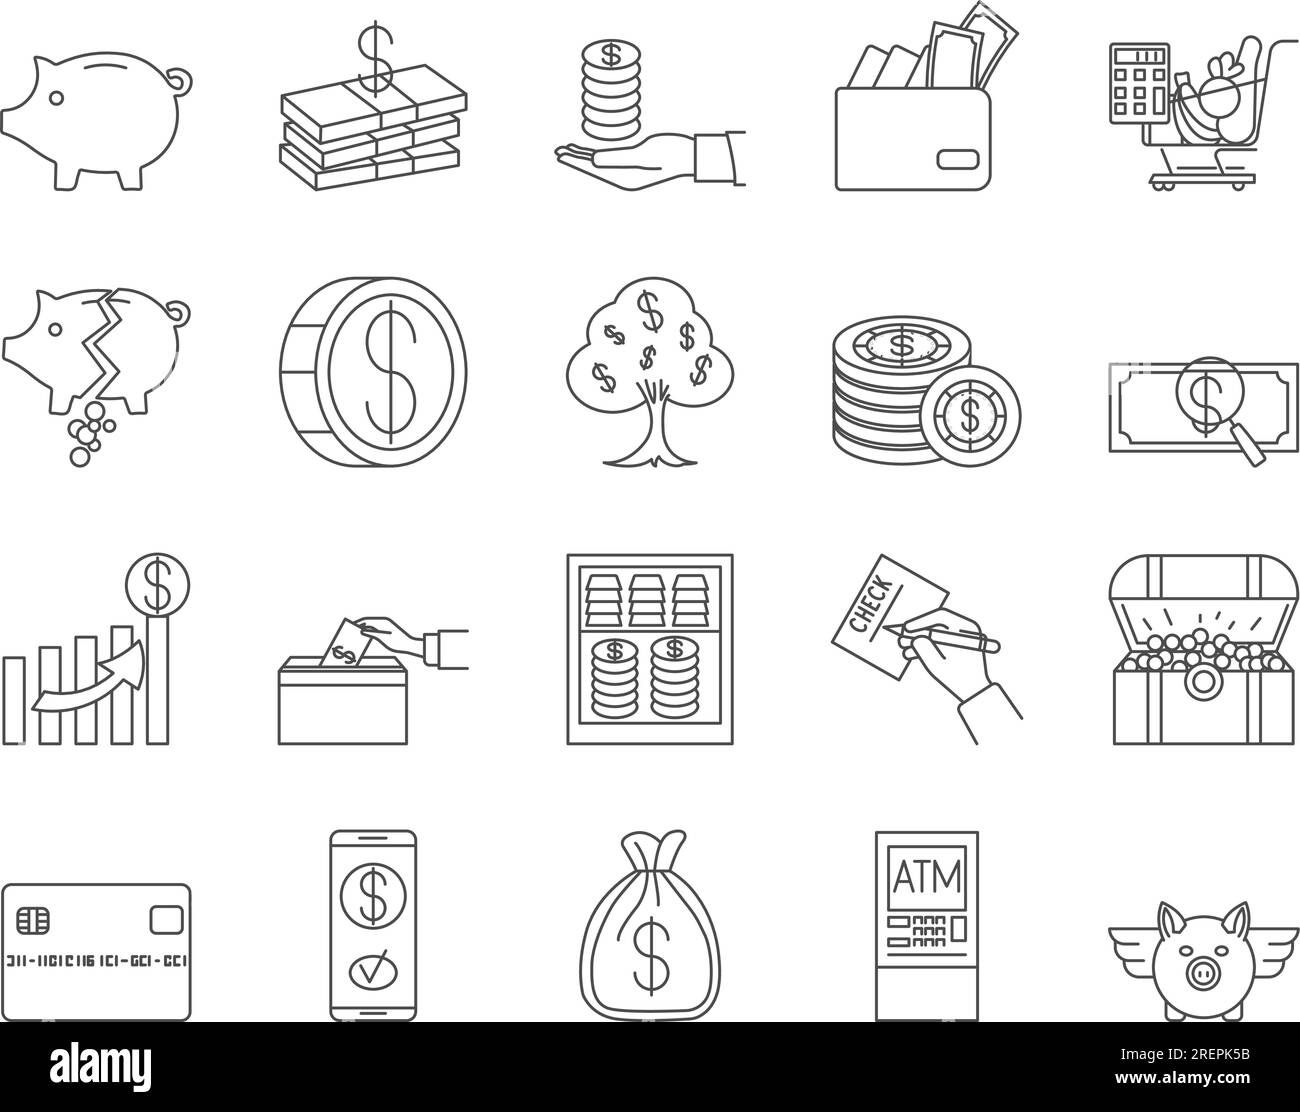 Money and Finance Icons Set. Coins, Wallet, Dollar, ATM. Editable Stroke. Simple Icons Vector Collection Stock Vector